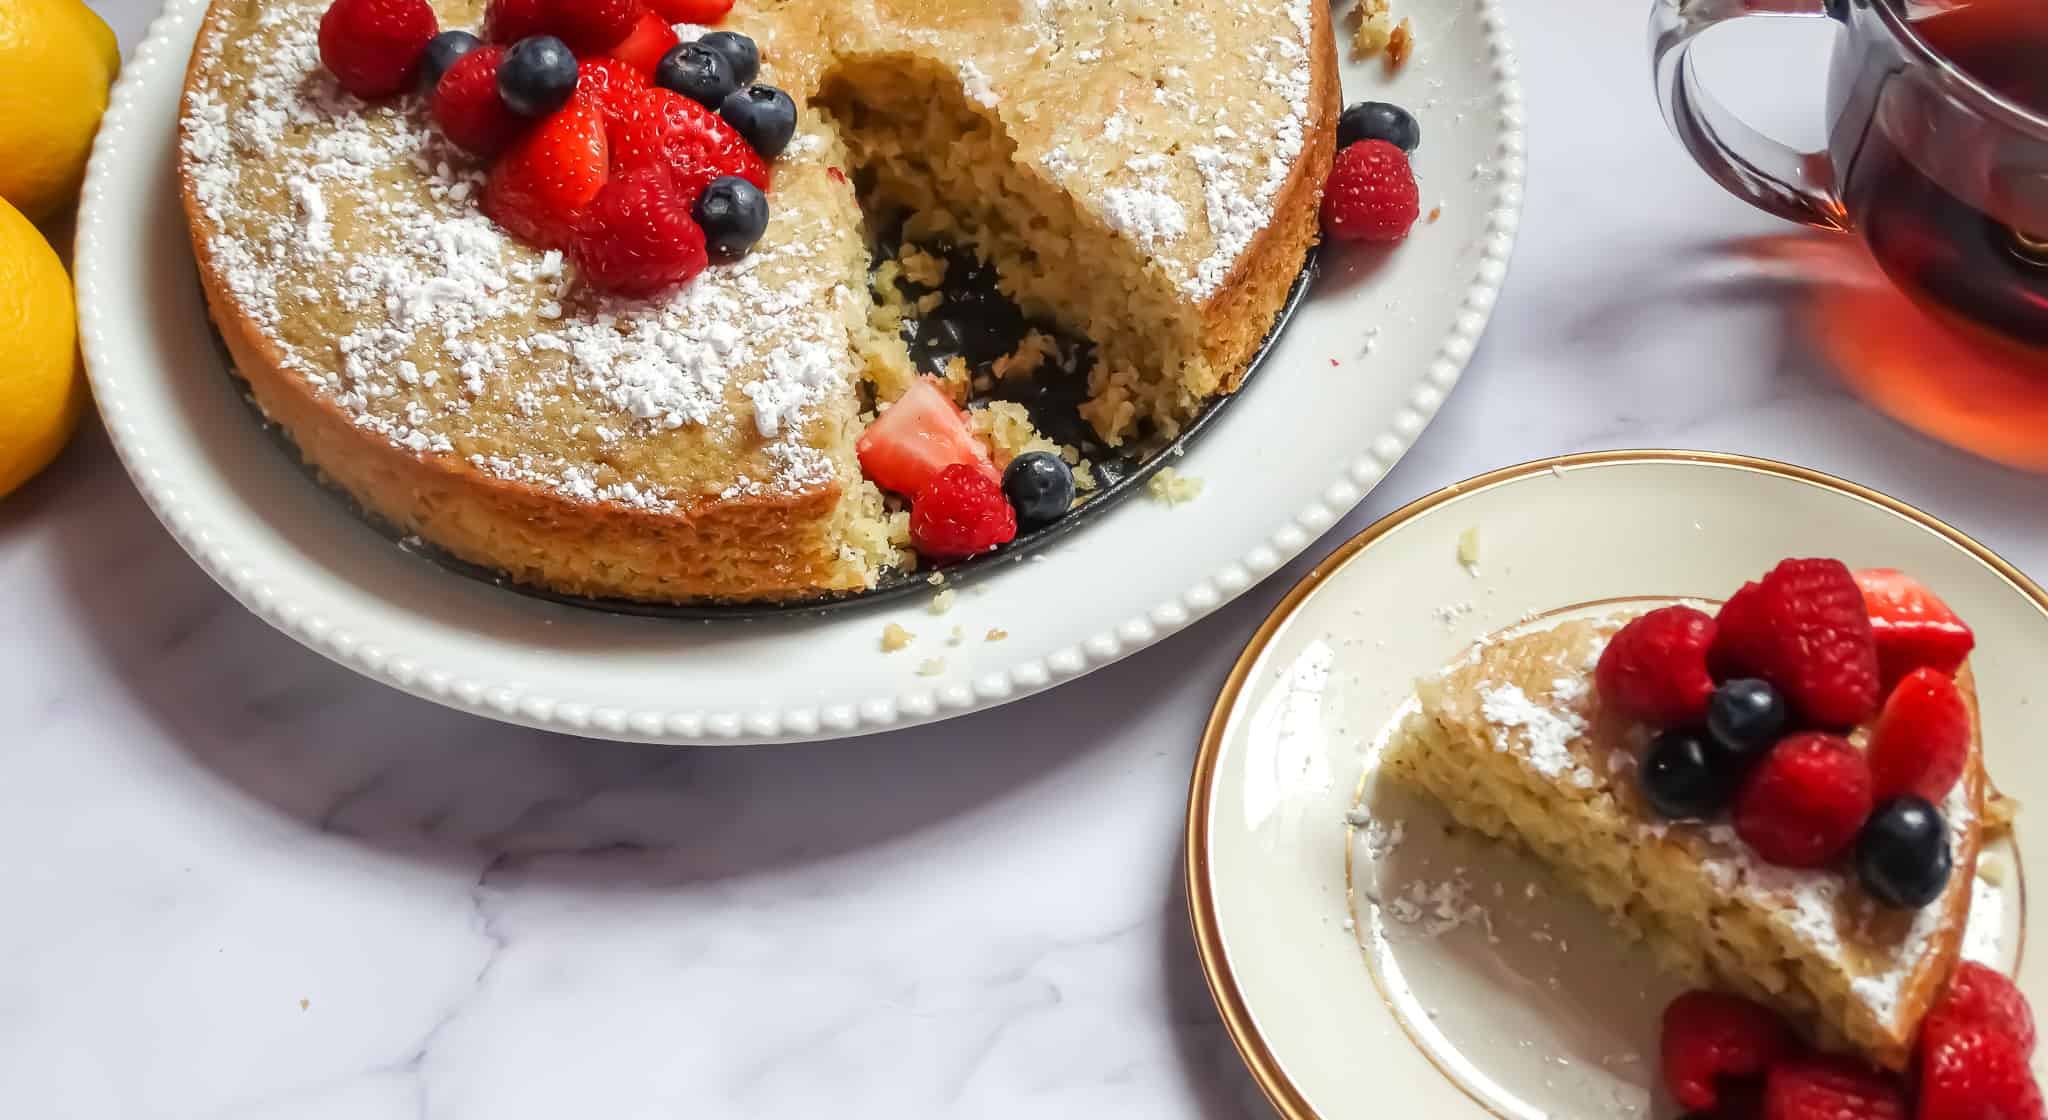 olive oil cake with lemon topped with chopped berries and sprinkled with powdered sugar